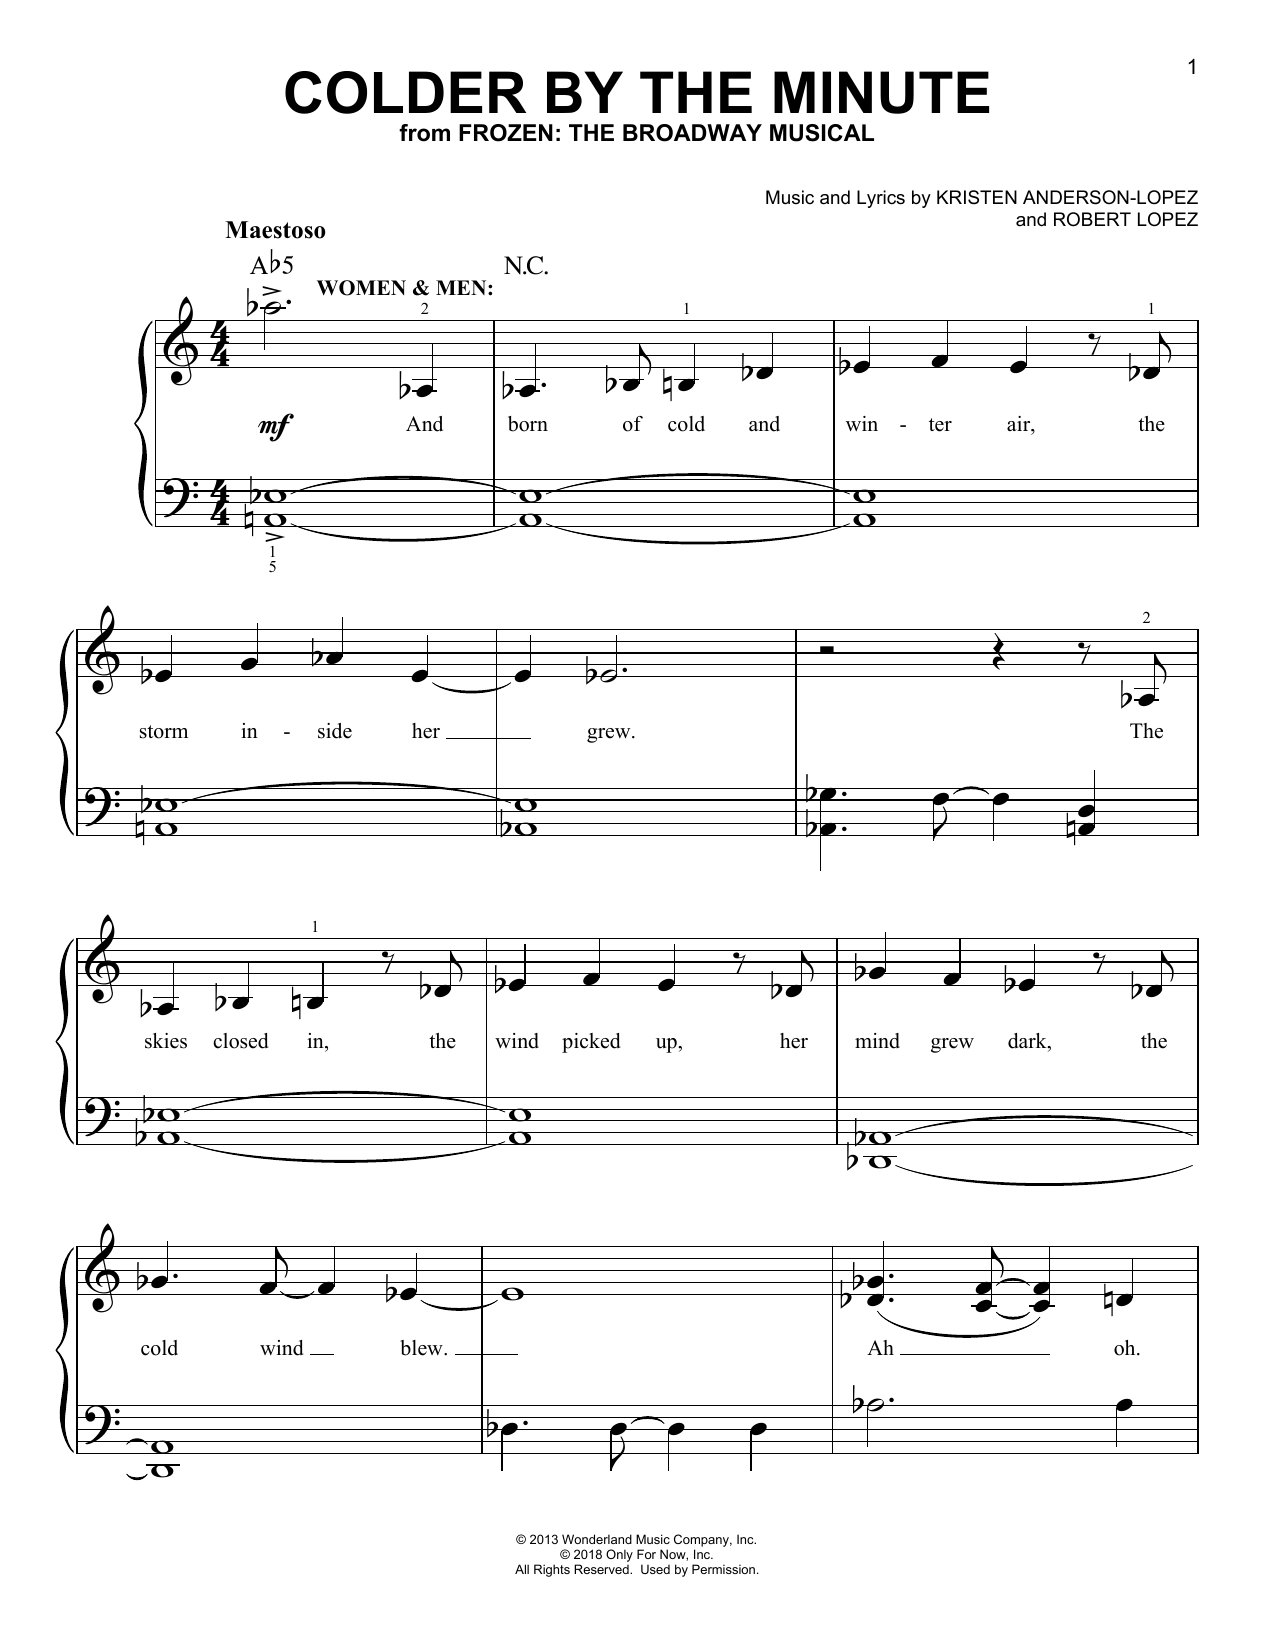 Download Kristen Anderson-Lopez & Robert Lope Colder By The Minute (from Frozen: The Sheet Music